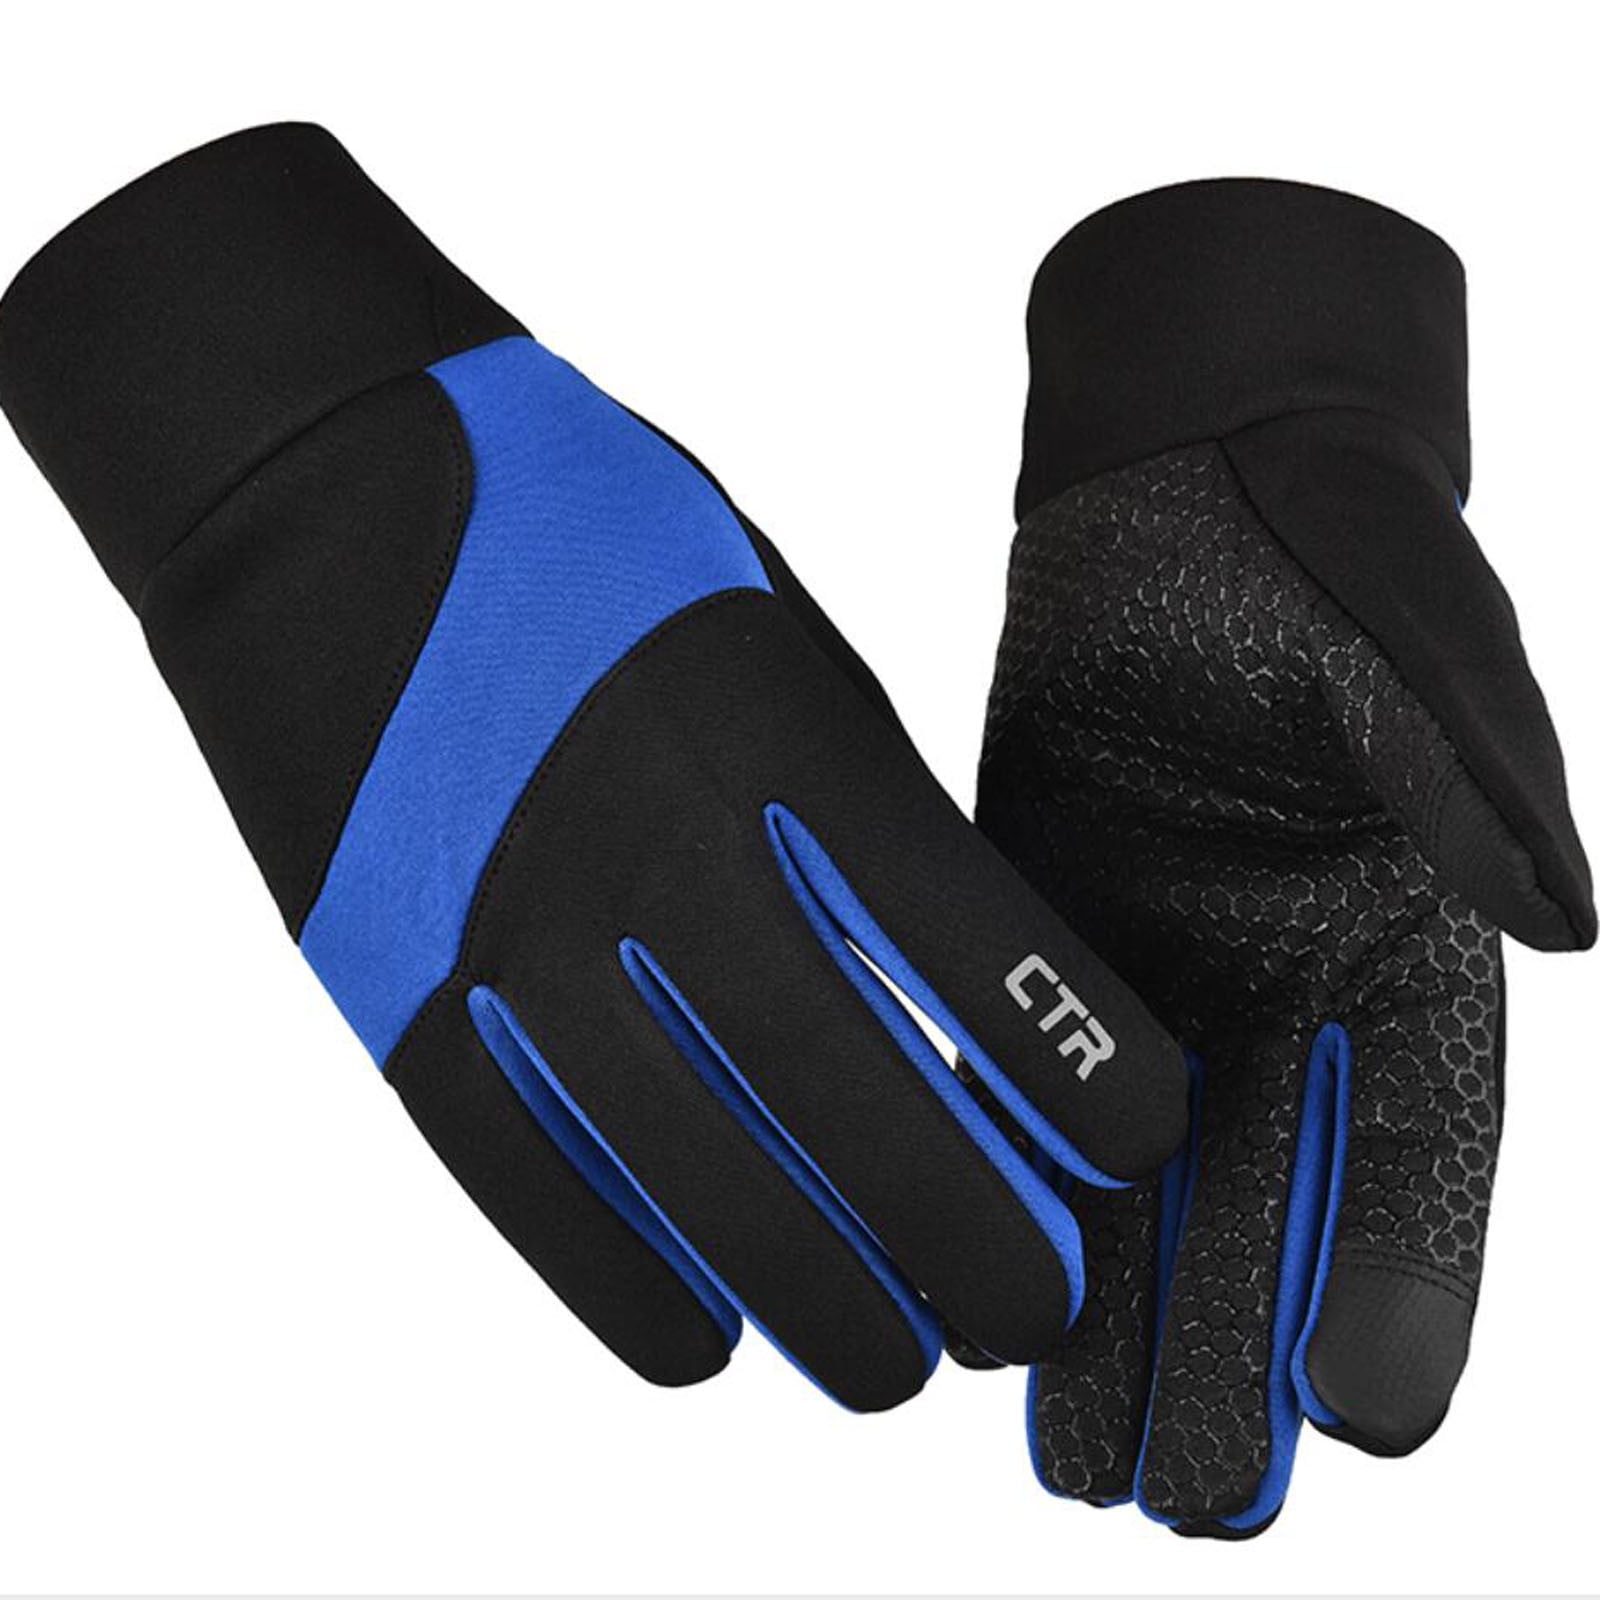 Cycling Soccer Rugby Mountain Biking OGLOVE Waterproof Thermal Sports Gloves Fishing and More Touchscreen Sensitive Field Gloves for Football 